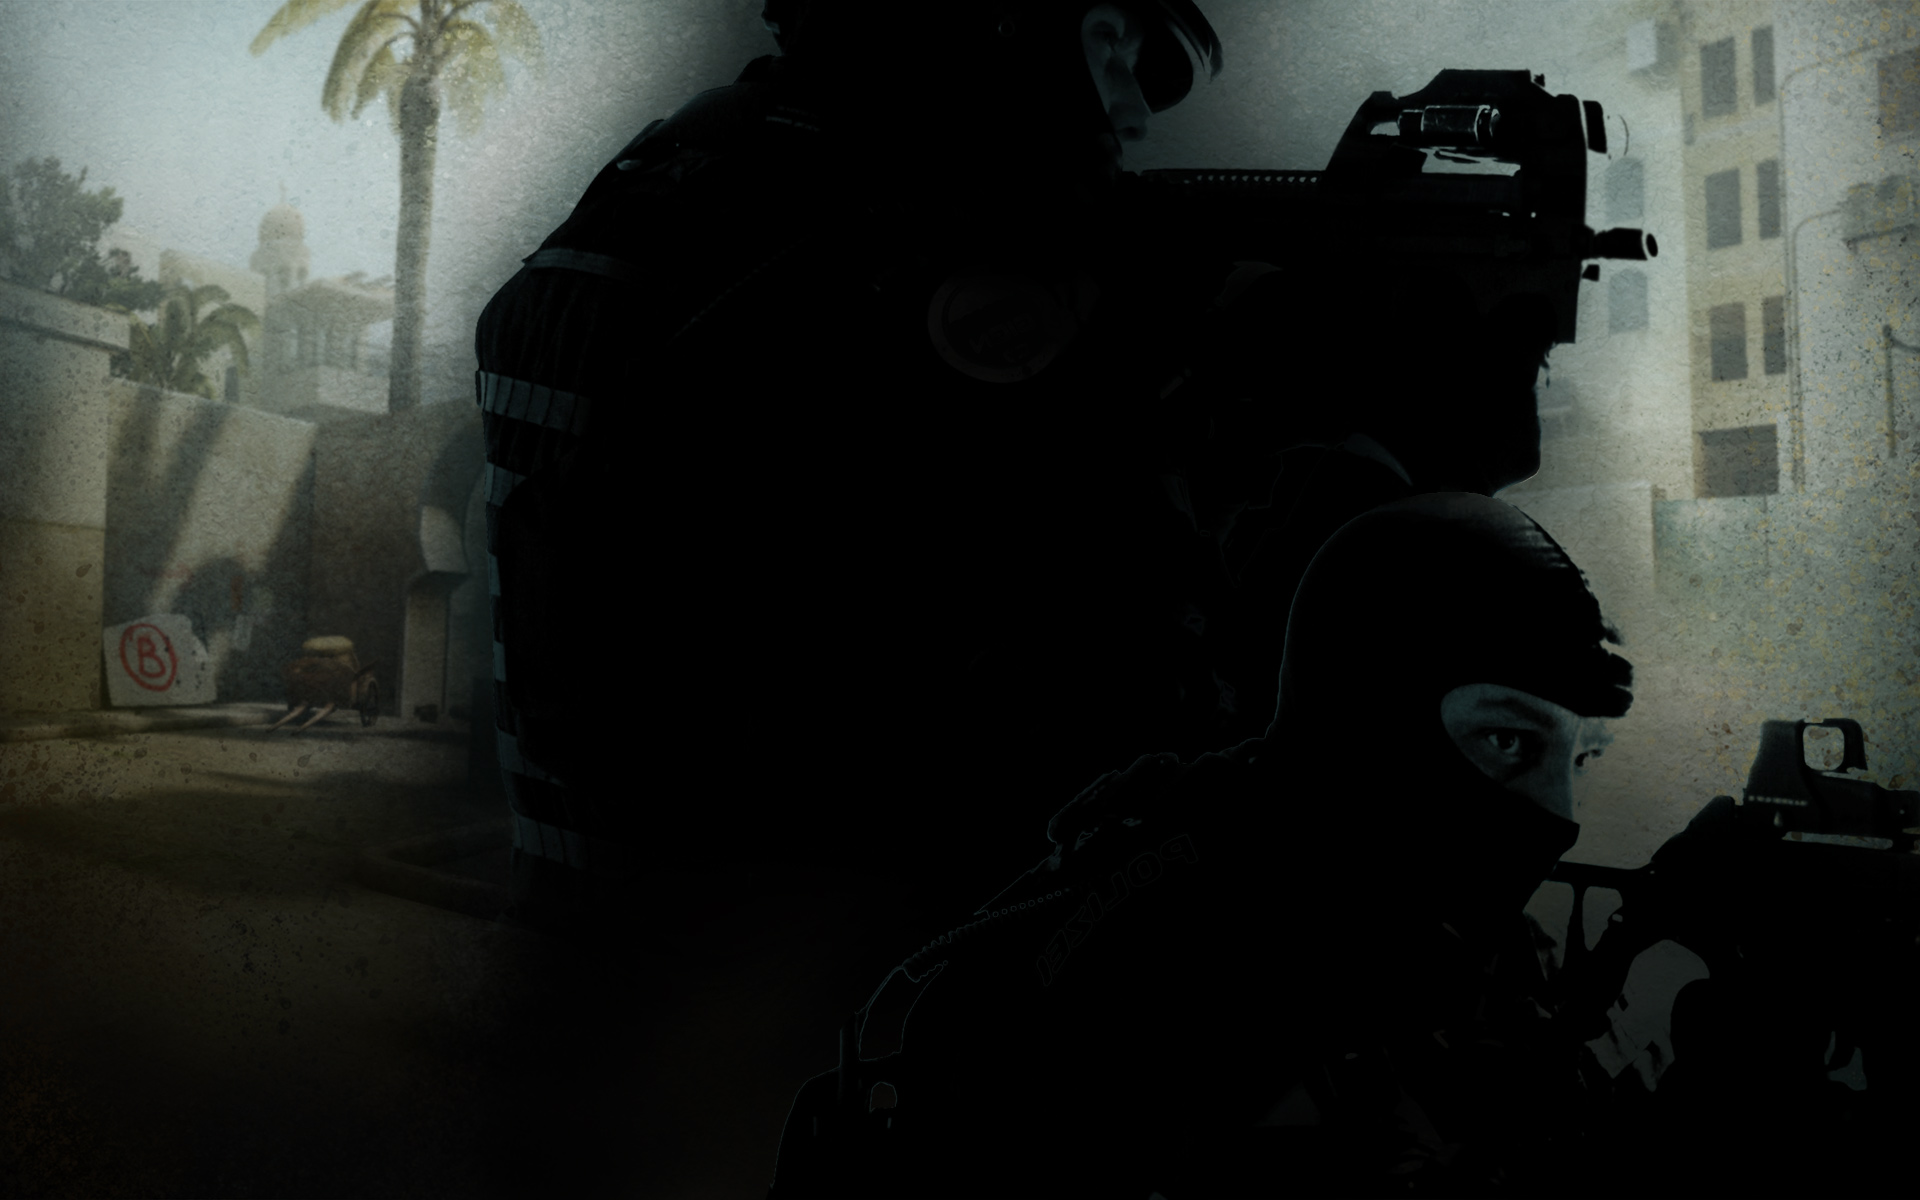 Wallpaper ID: 123399 / Counter-Strike: Global Offensive, Valve, PC gaming,  weapon Wallpaper